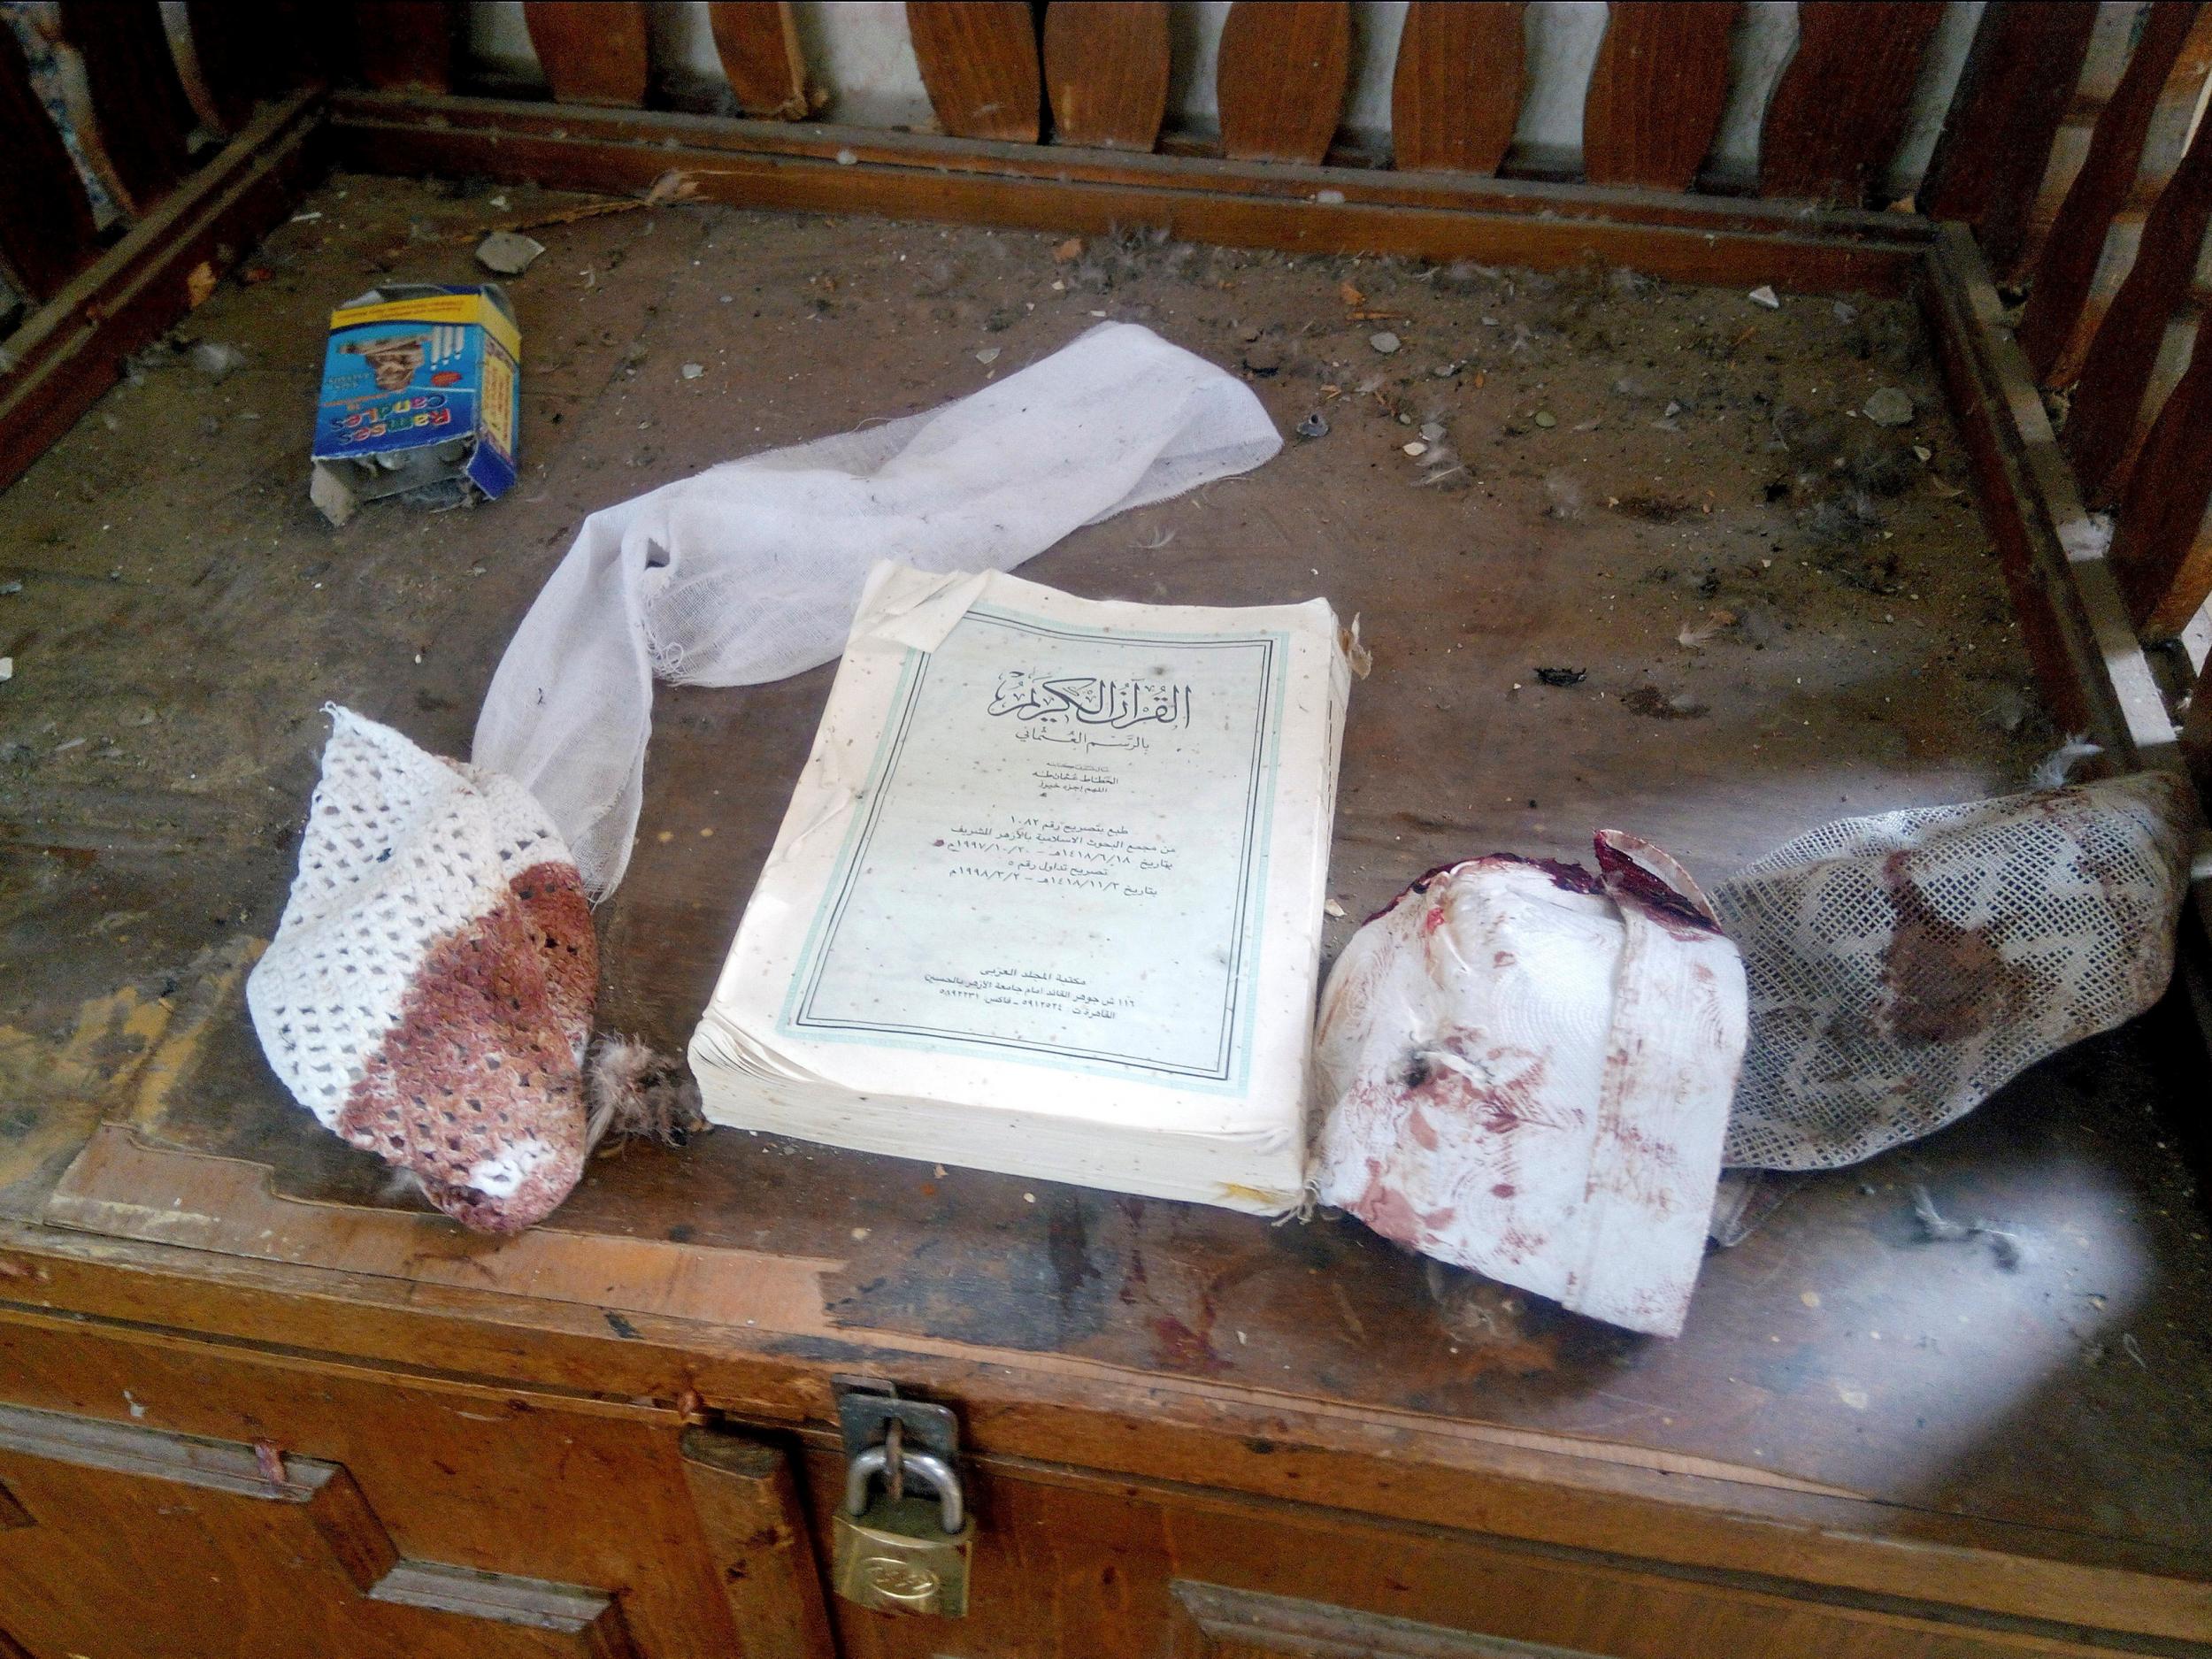 A Quran and remnants of personal belongings of victims of the attack on the al-Rawdah mosque